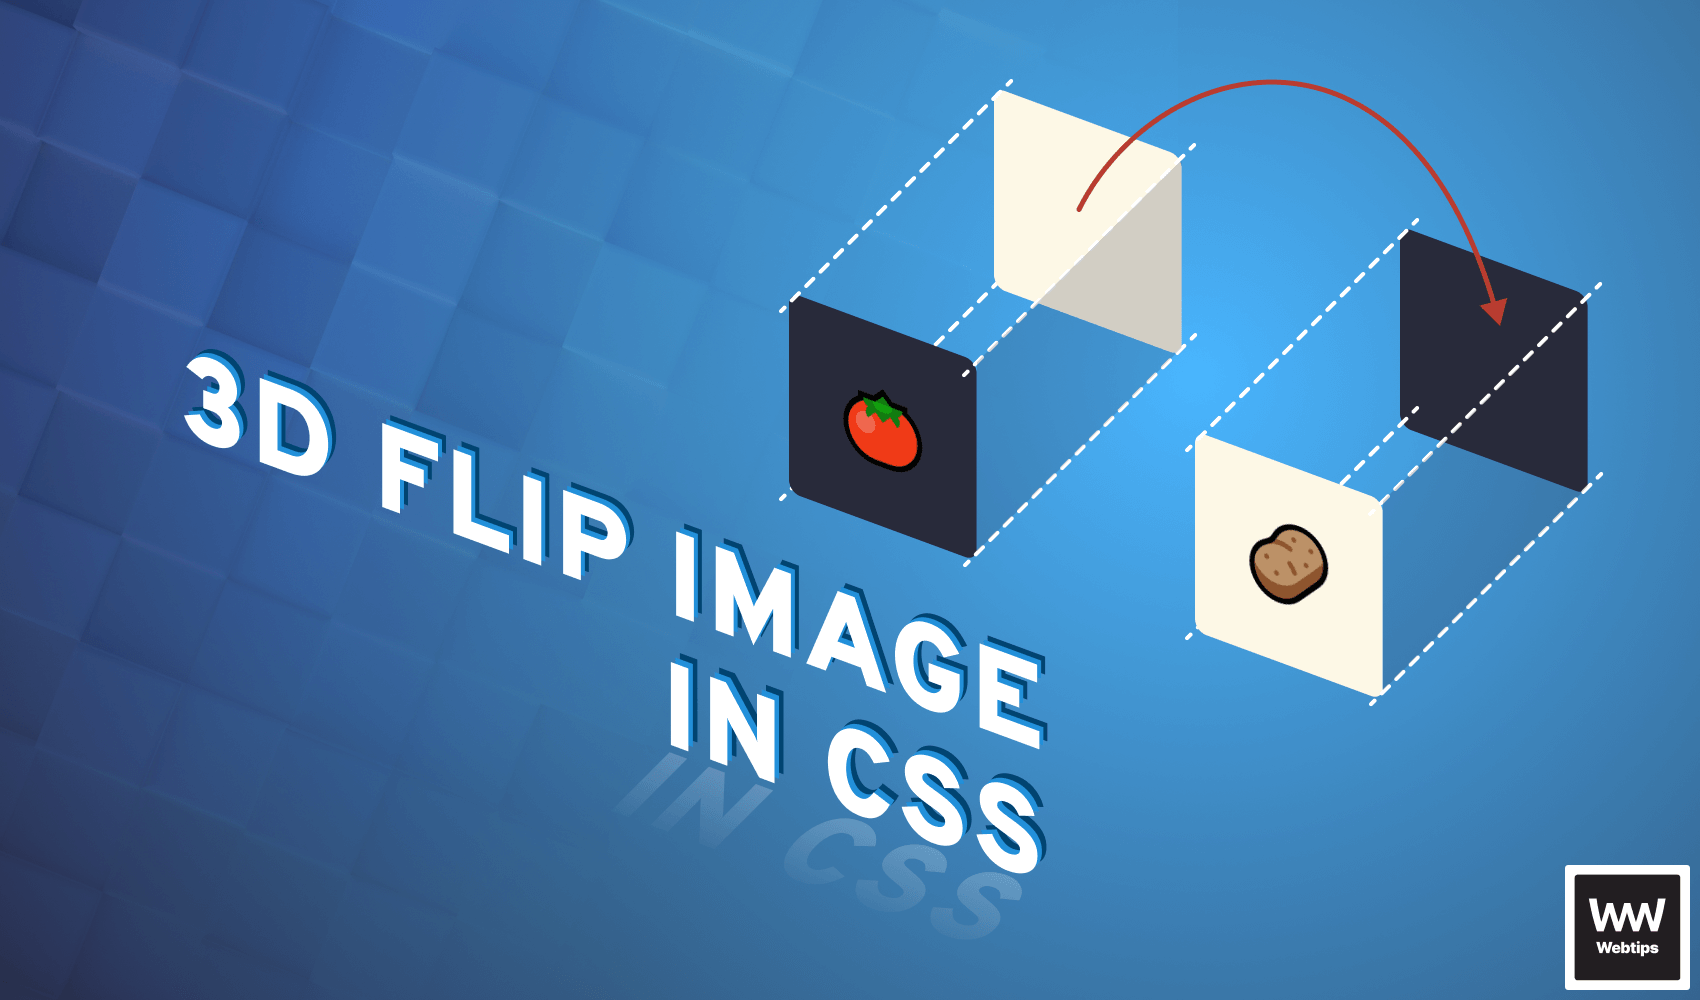 How to 3D Flip Images With CSS